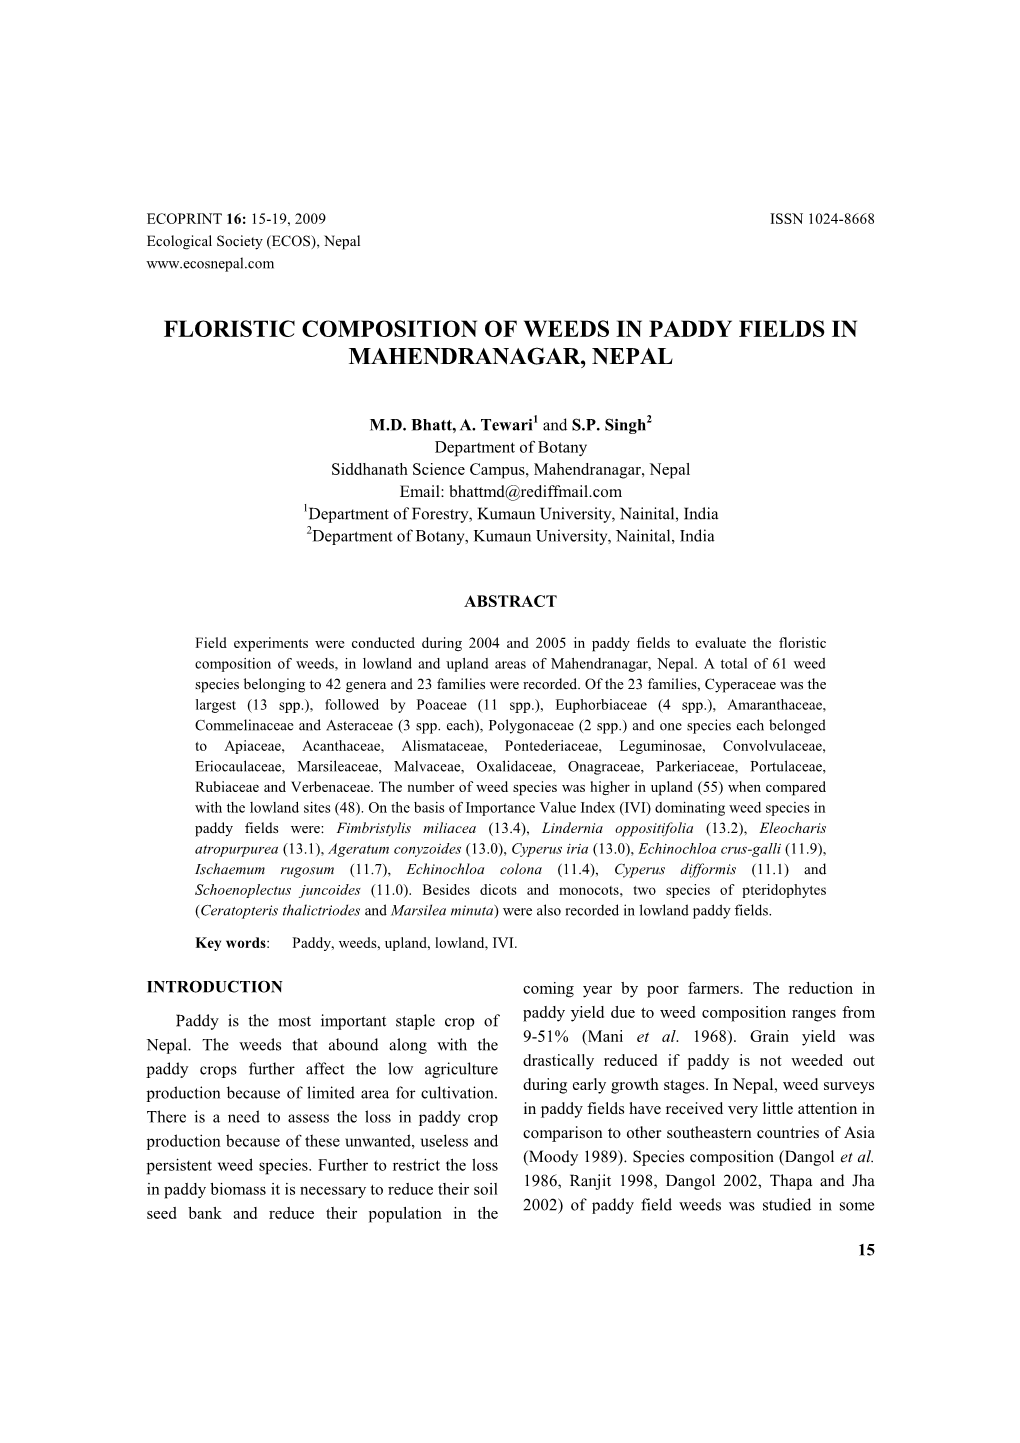 Floristic Composition of Weeds in Paddy Fields in Mahendranagar, Nepal